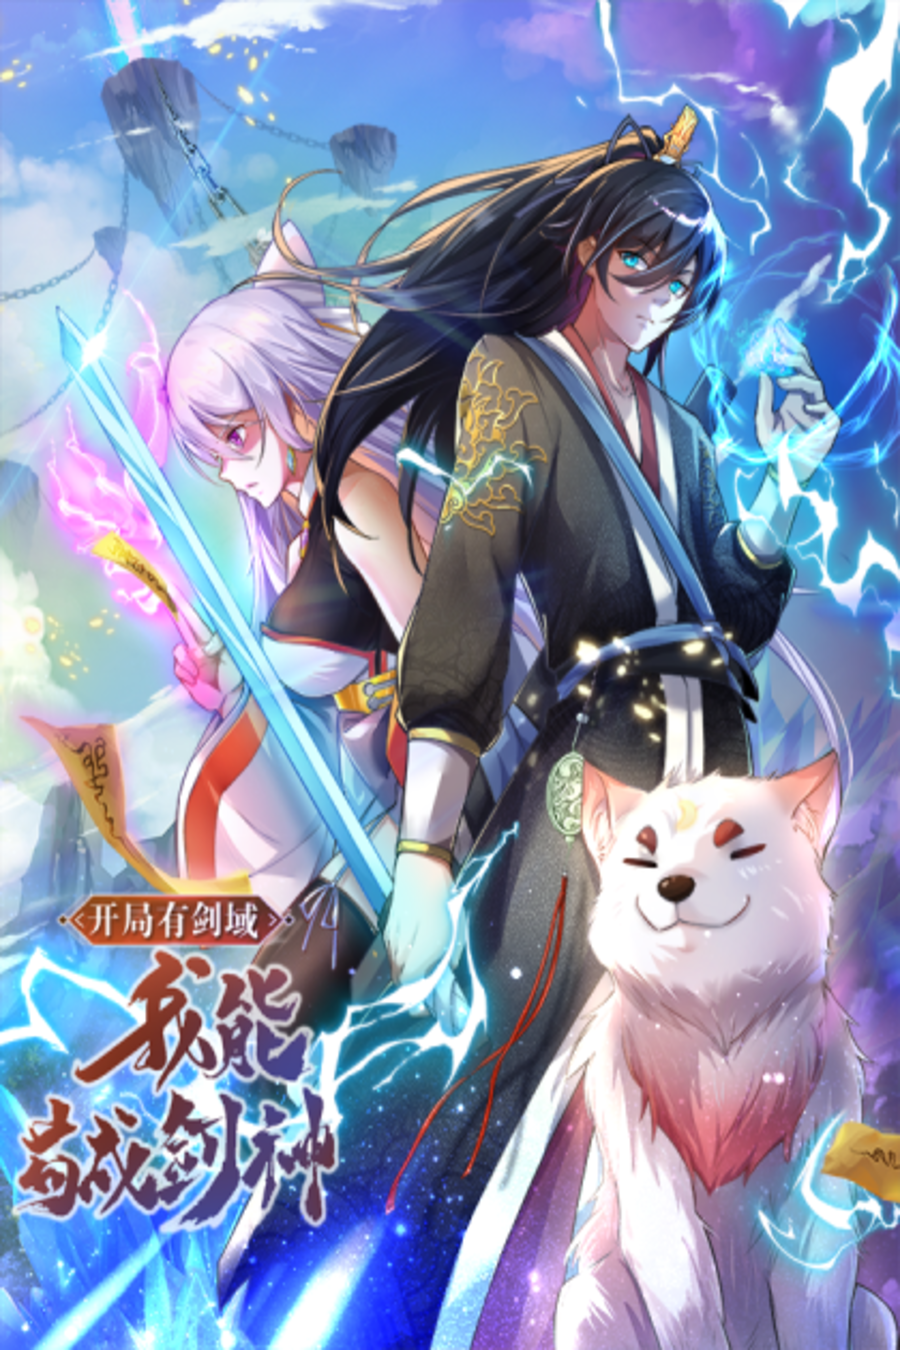 Becoming A Sword Deity By Expanding My Sword Domain - chapter 100 - #1